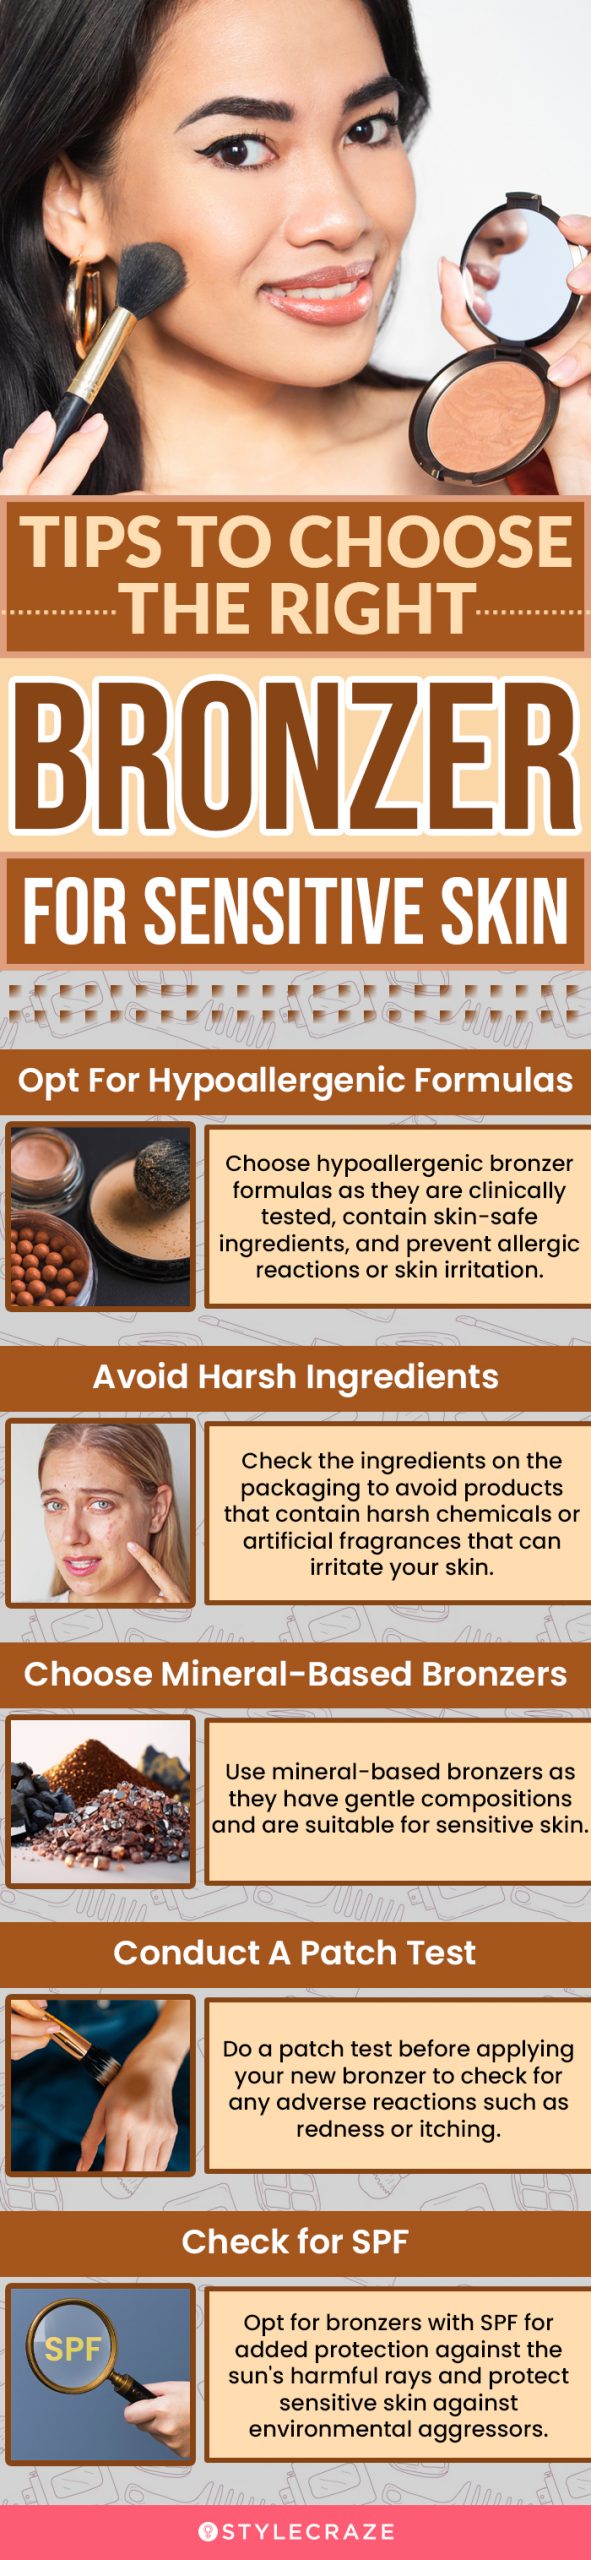 Tips To Choose The Right Bronzer For Sensitive Skin (infographic)